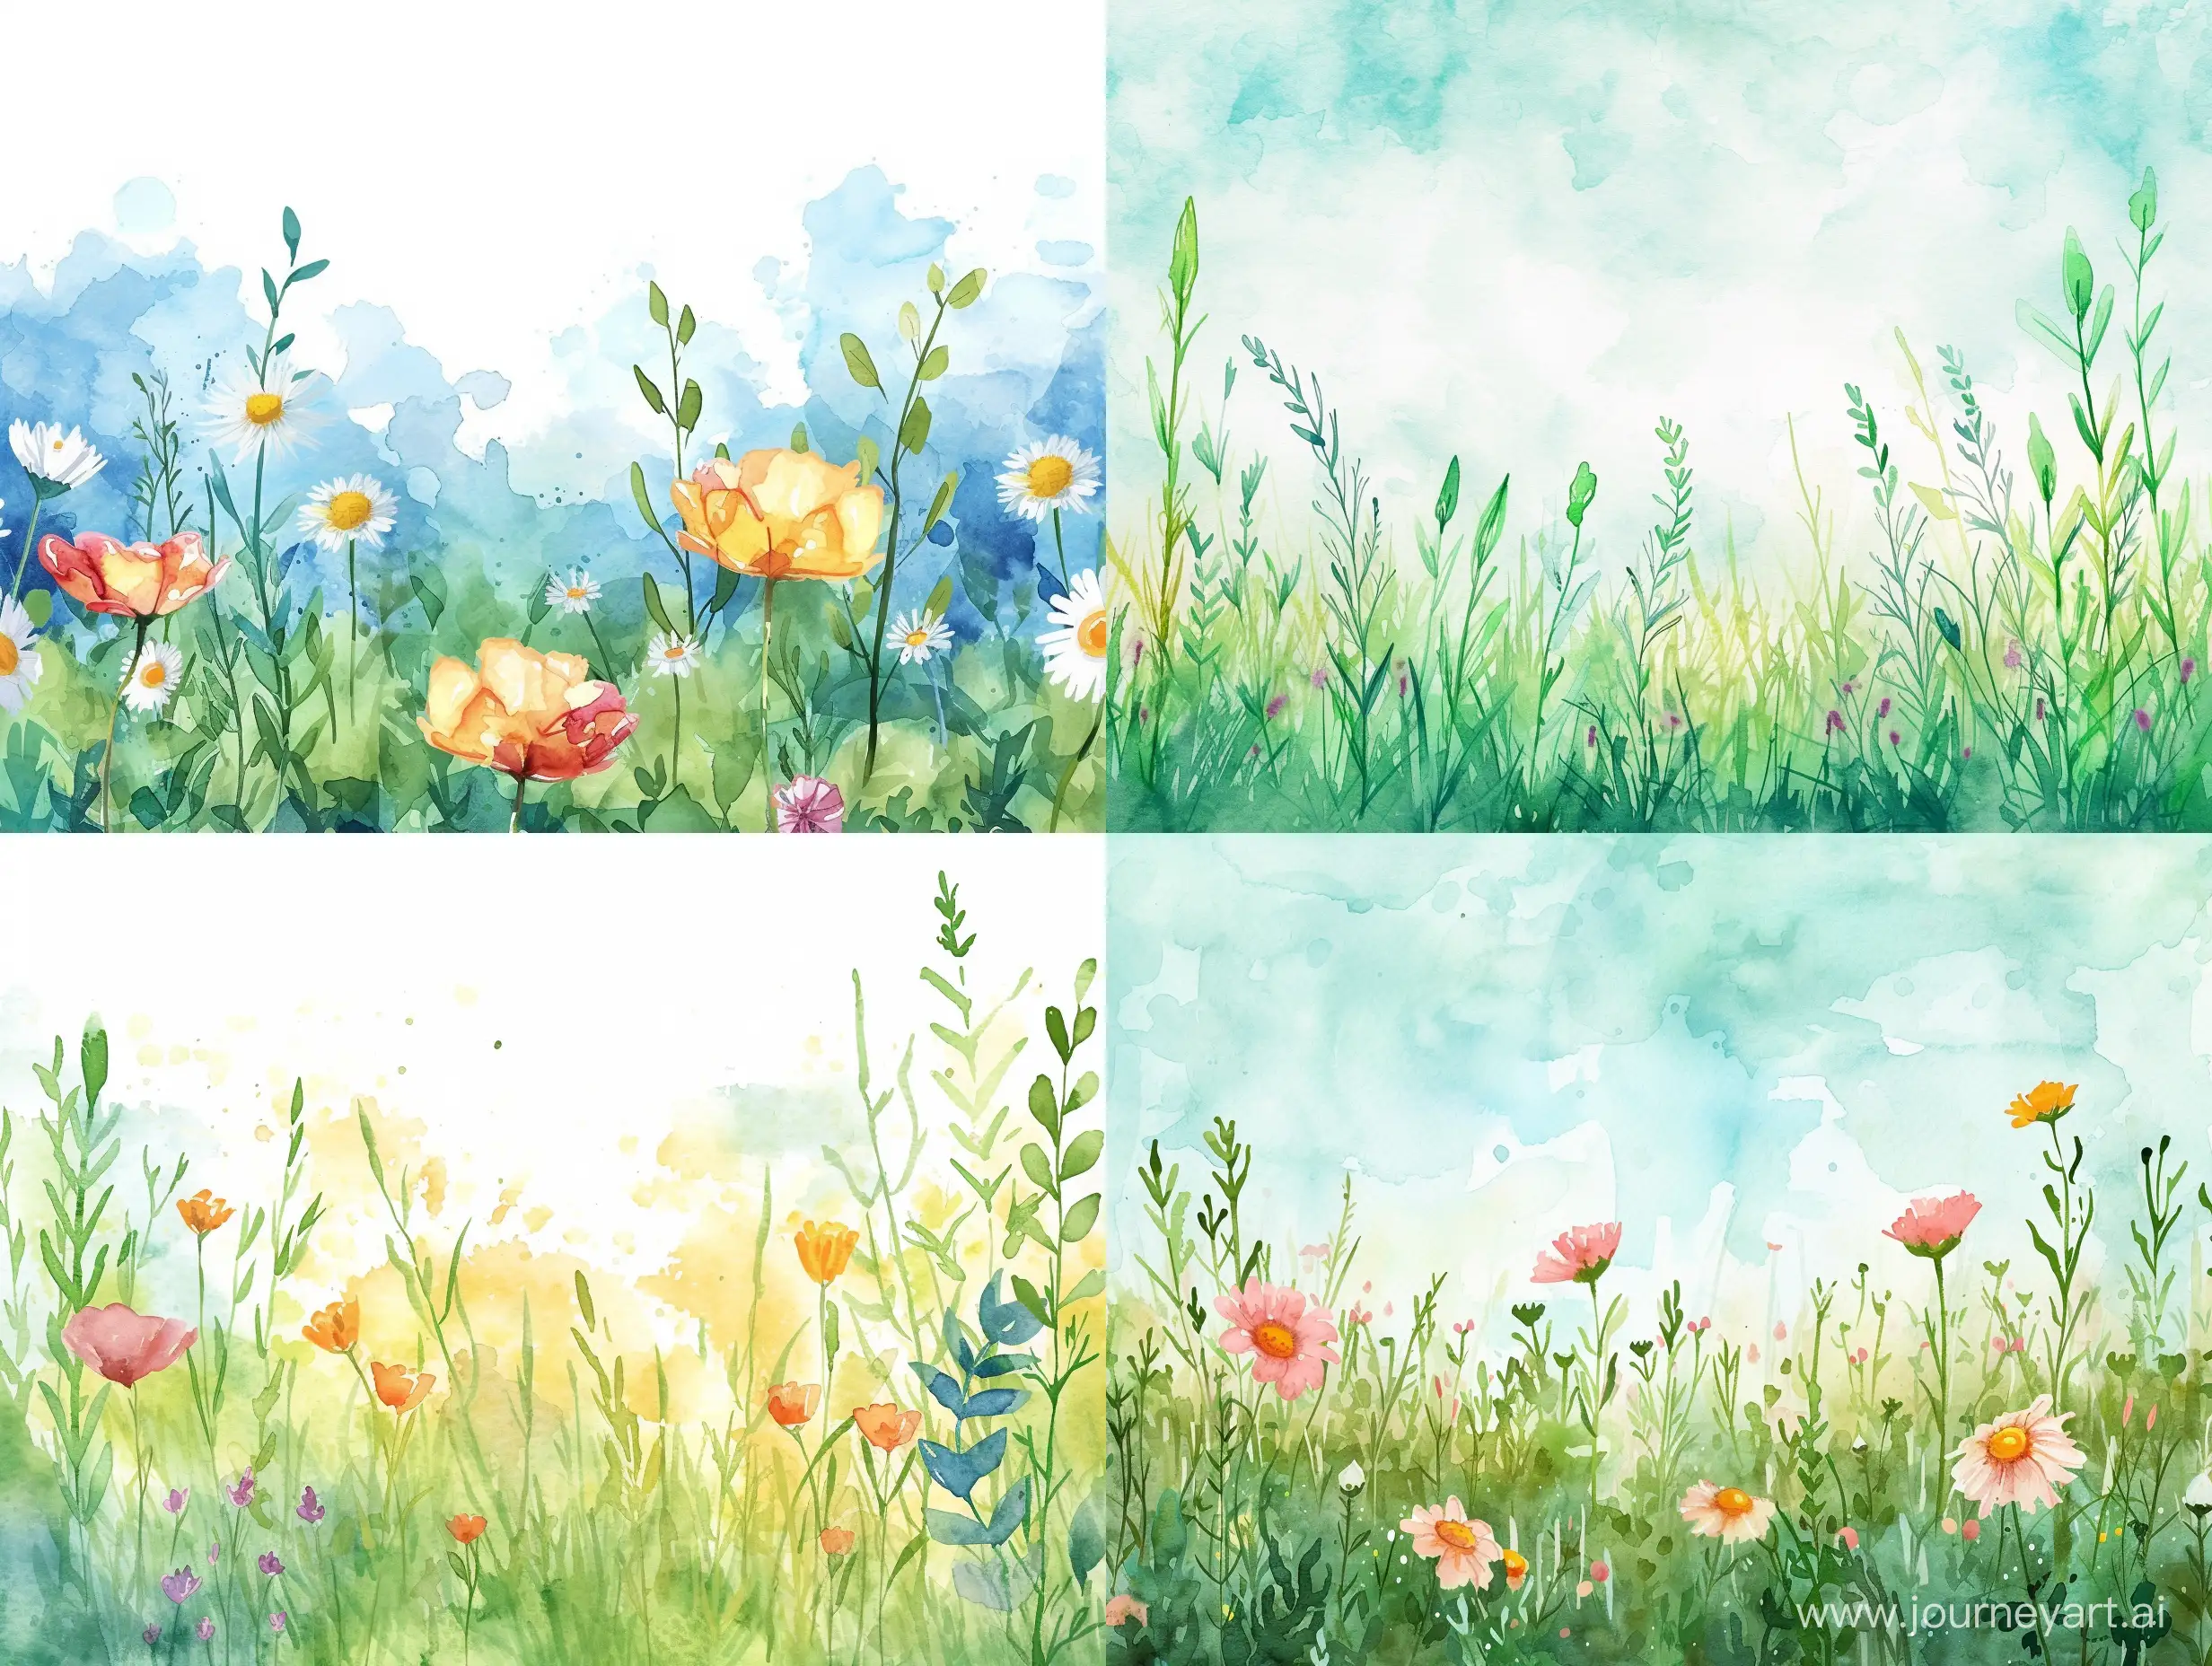 Vibrant-Watercolor-Meadow-Landscape-with-a-Touch-of-Serenity